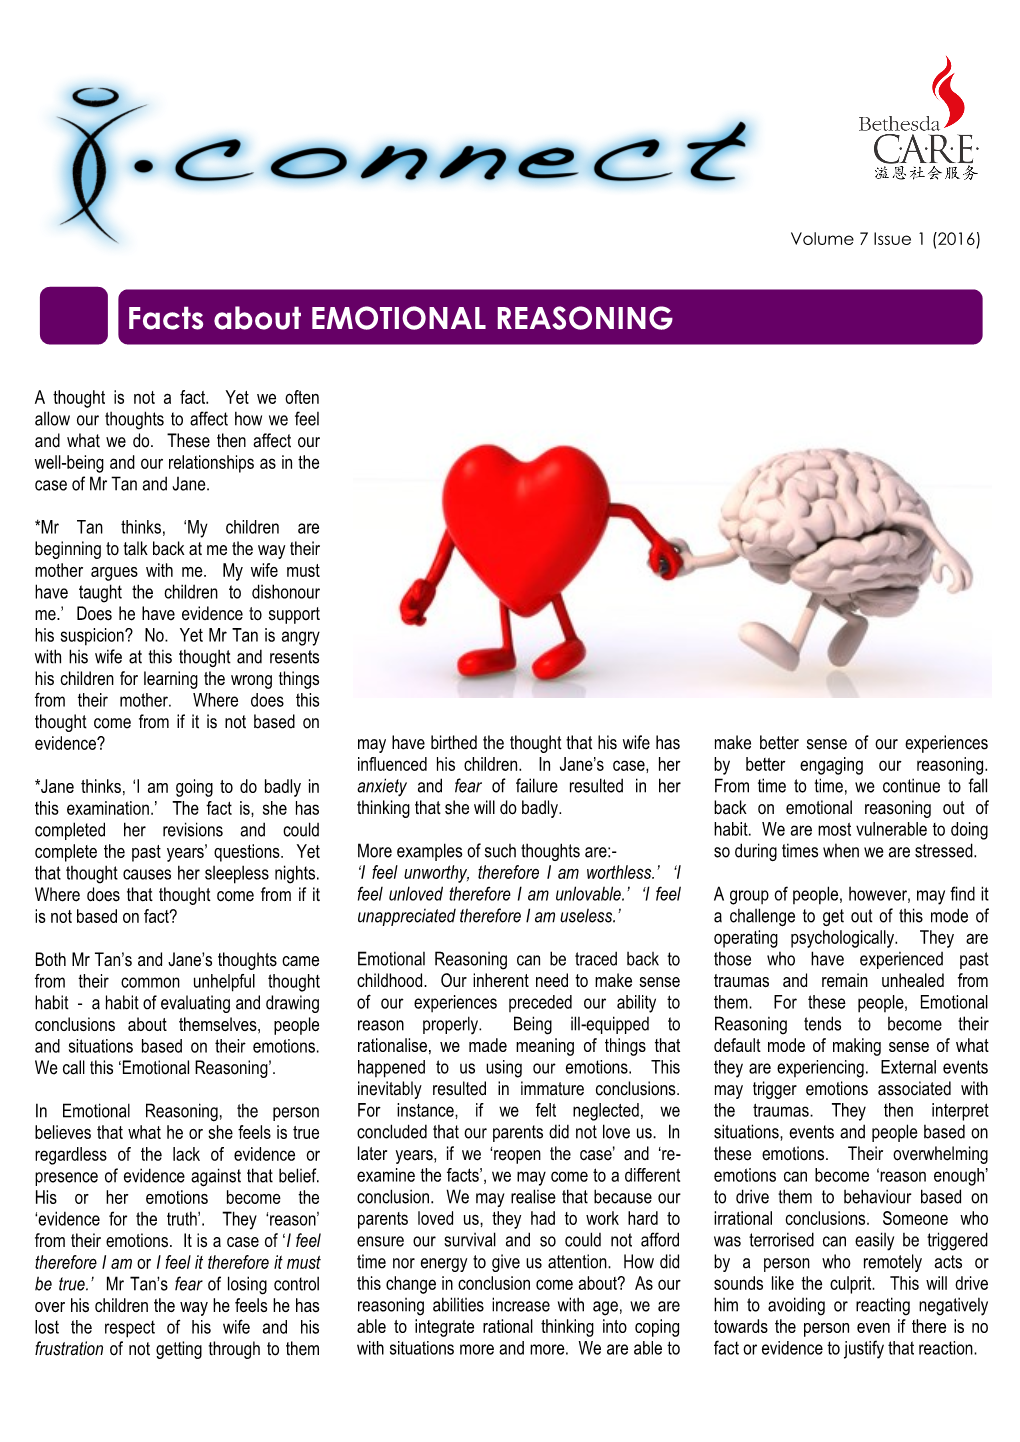 Facts About EMOTIONAL REASONING